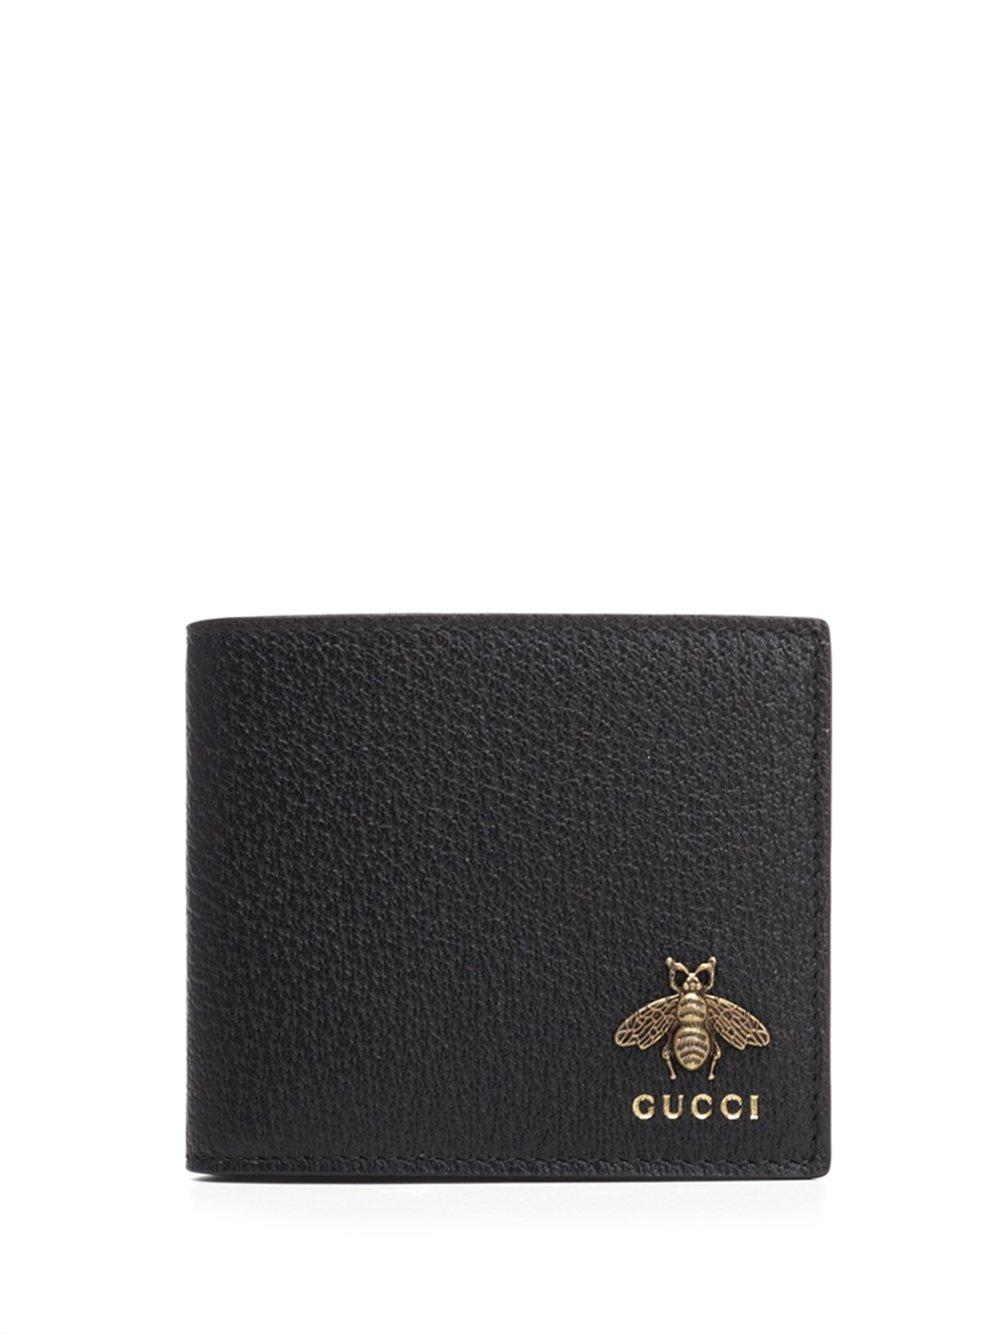 Gucci Leather Bee Logo Wallet in Black 